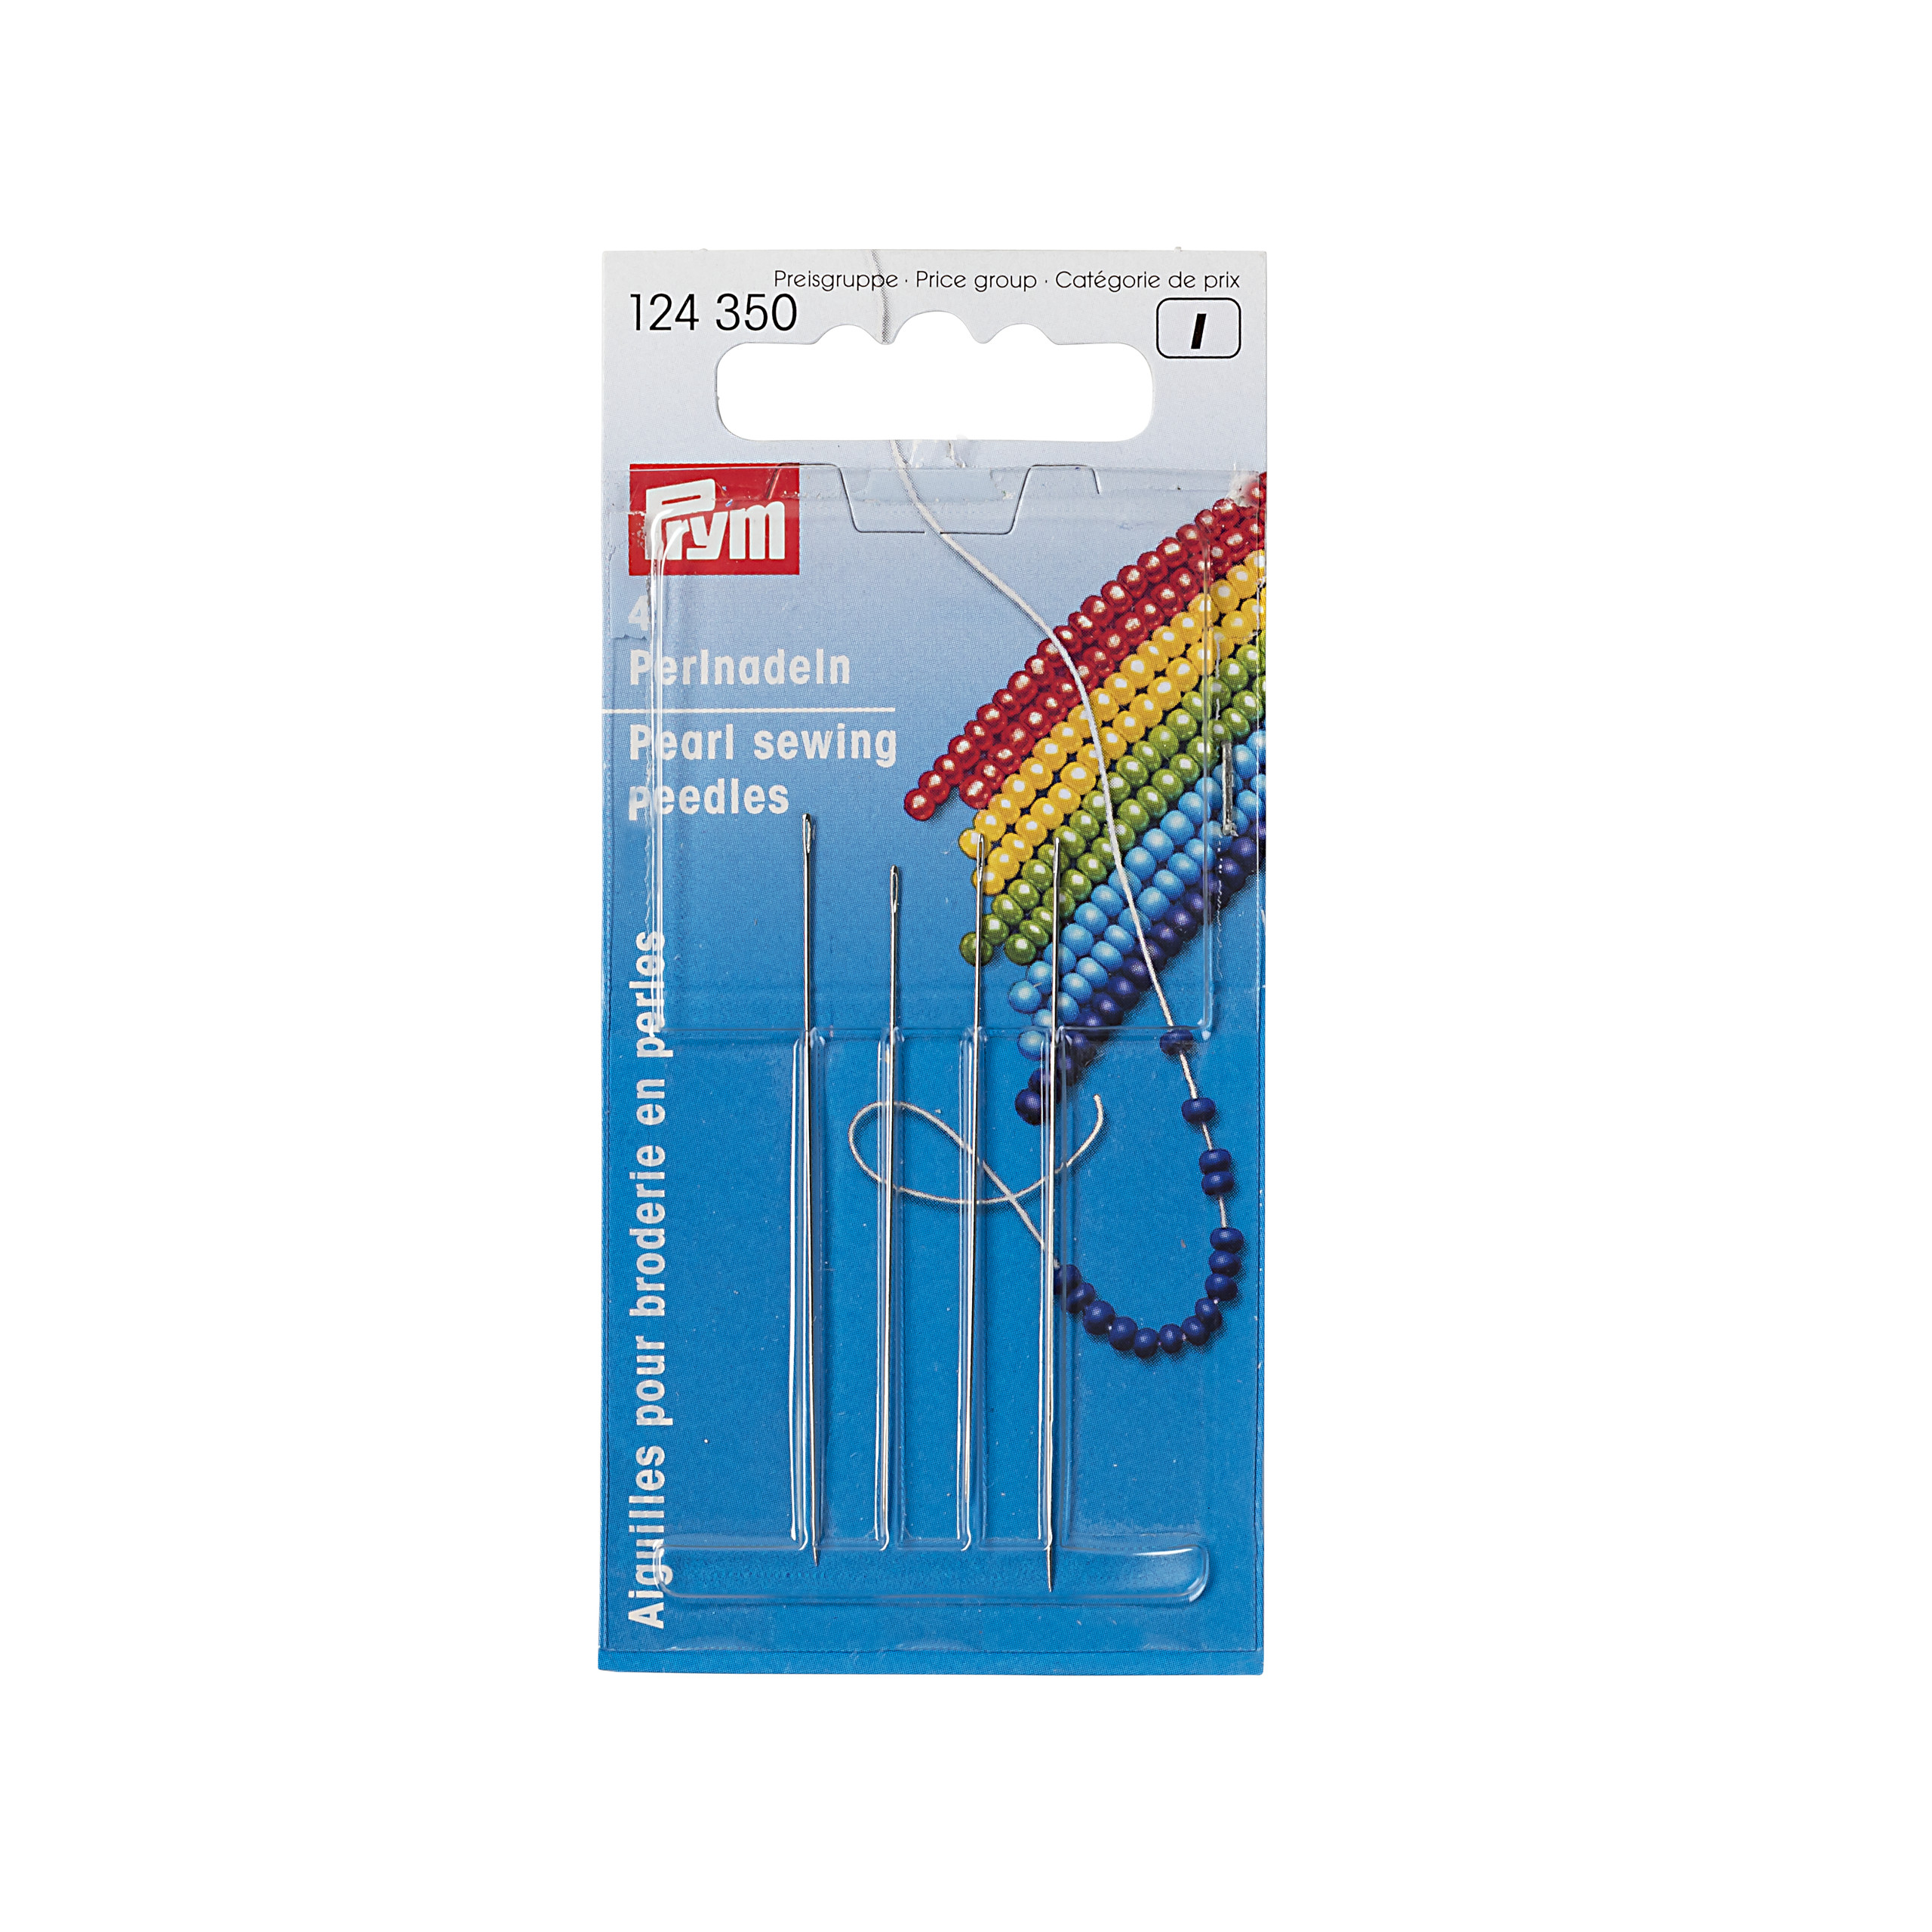 Pearl Sewing Needles HT 10/12 0.45 x 55/0.40 x 50 mm si/gold col, 4 St